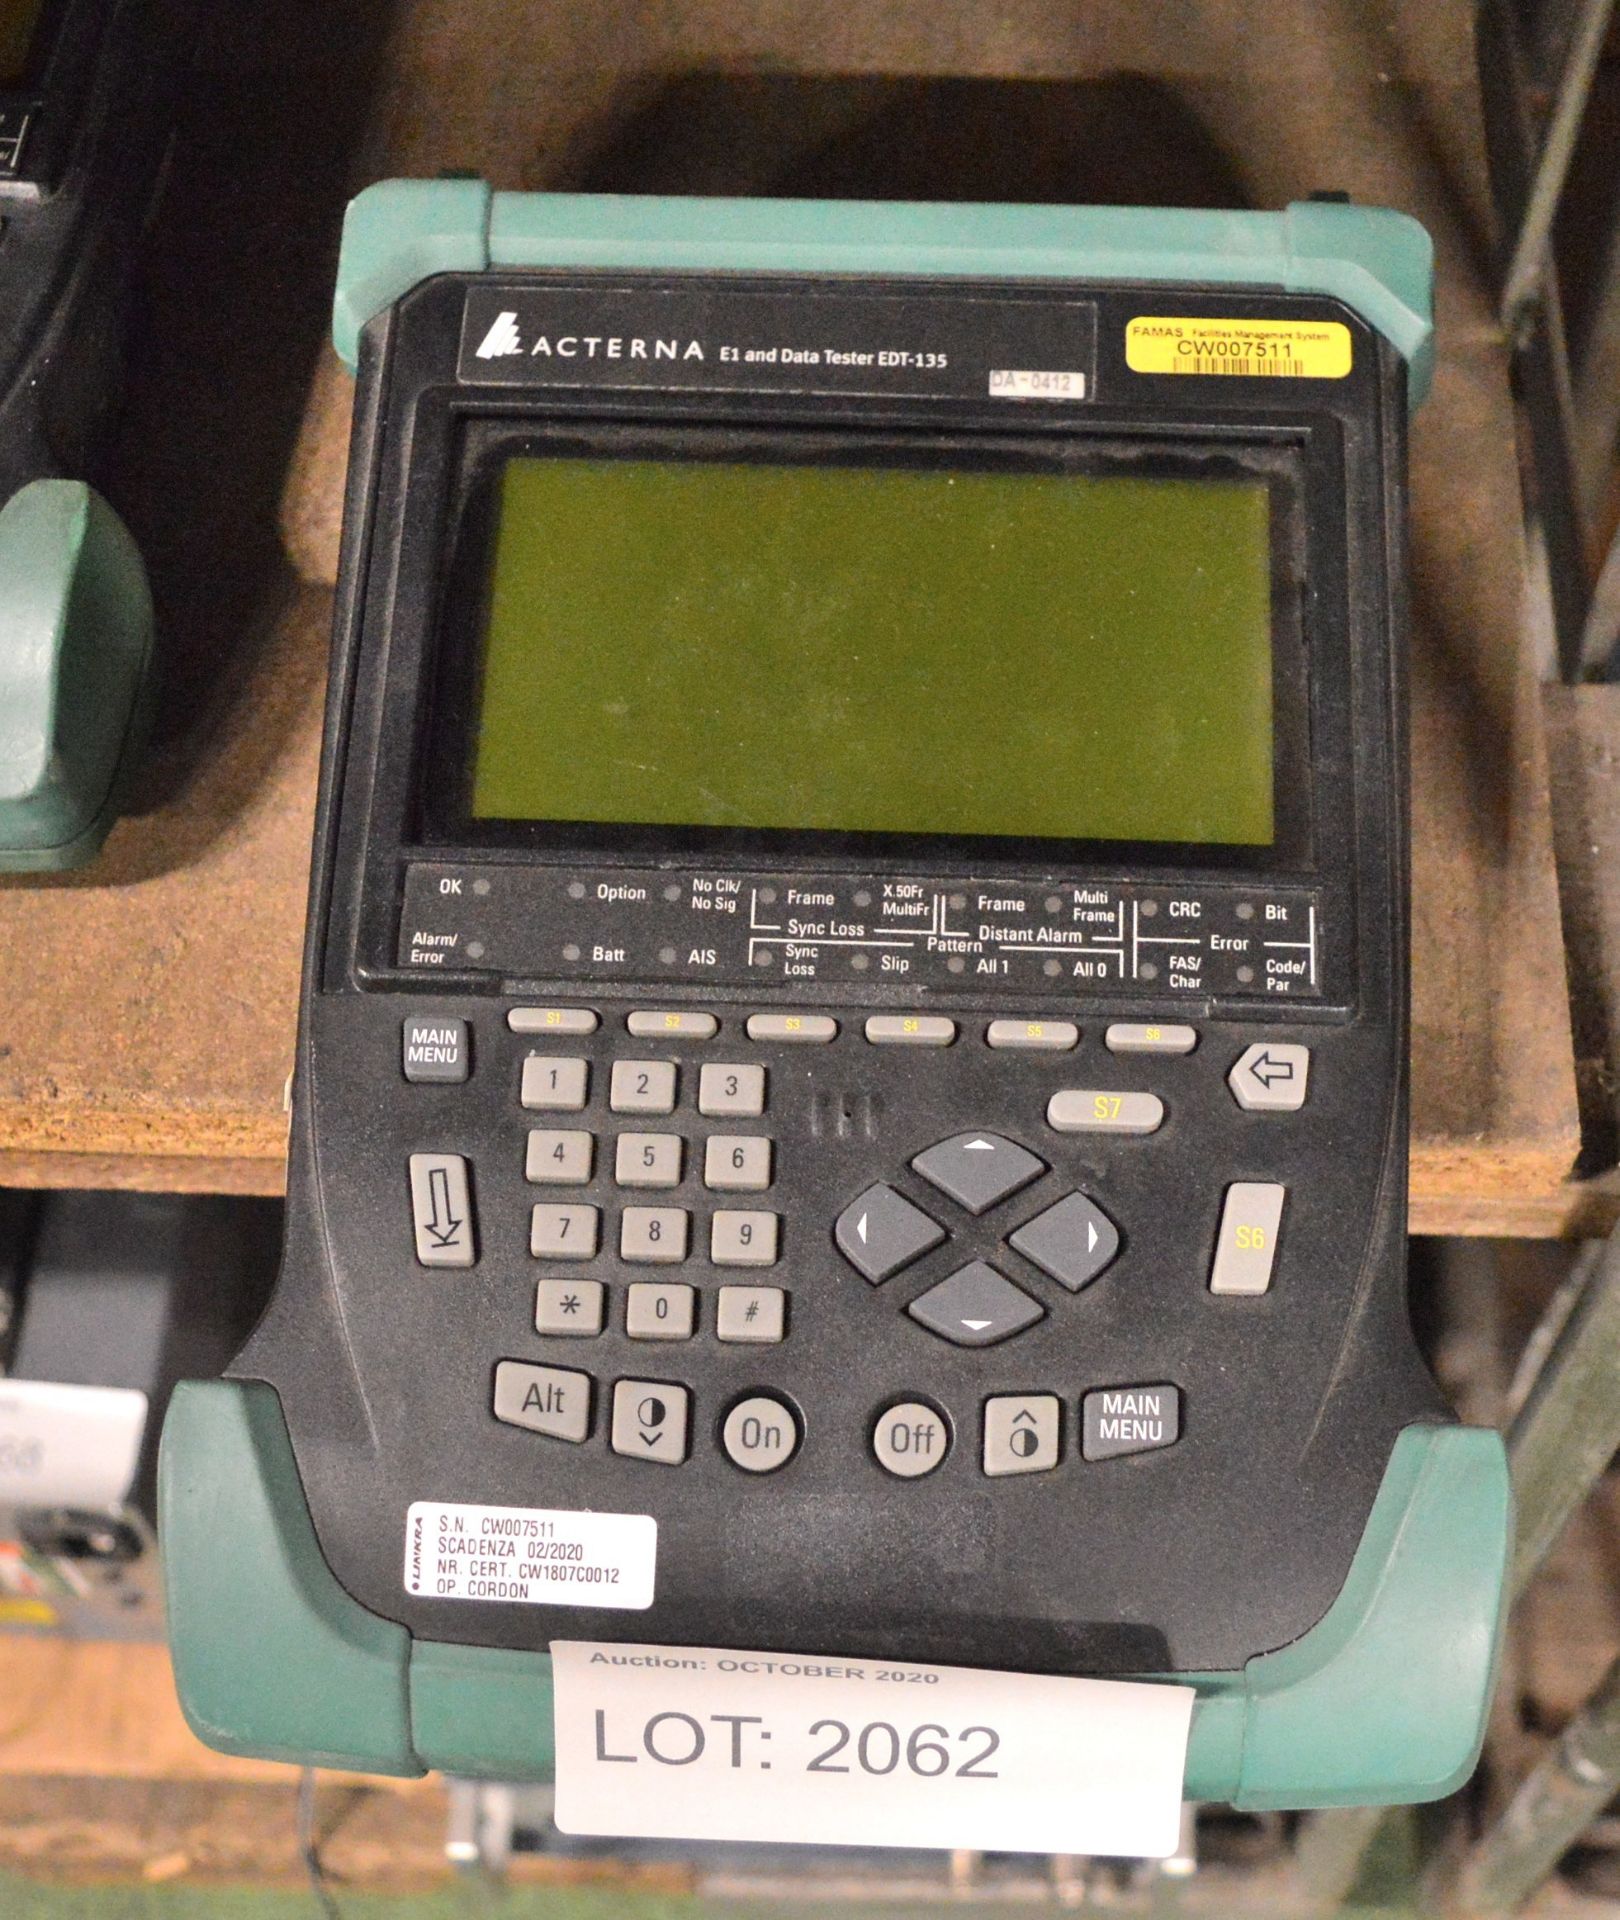 Acterna E1 and data tester EDT-135